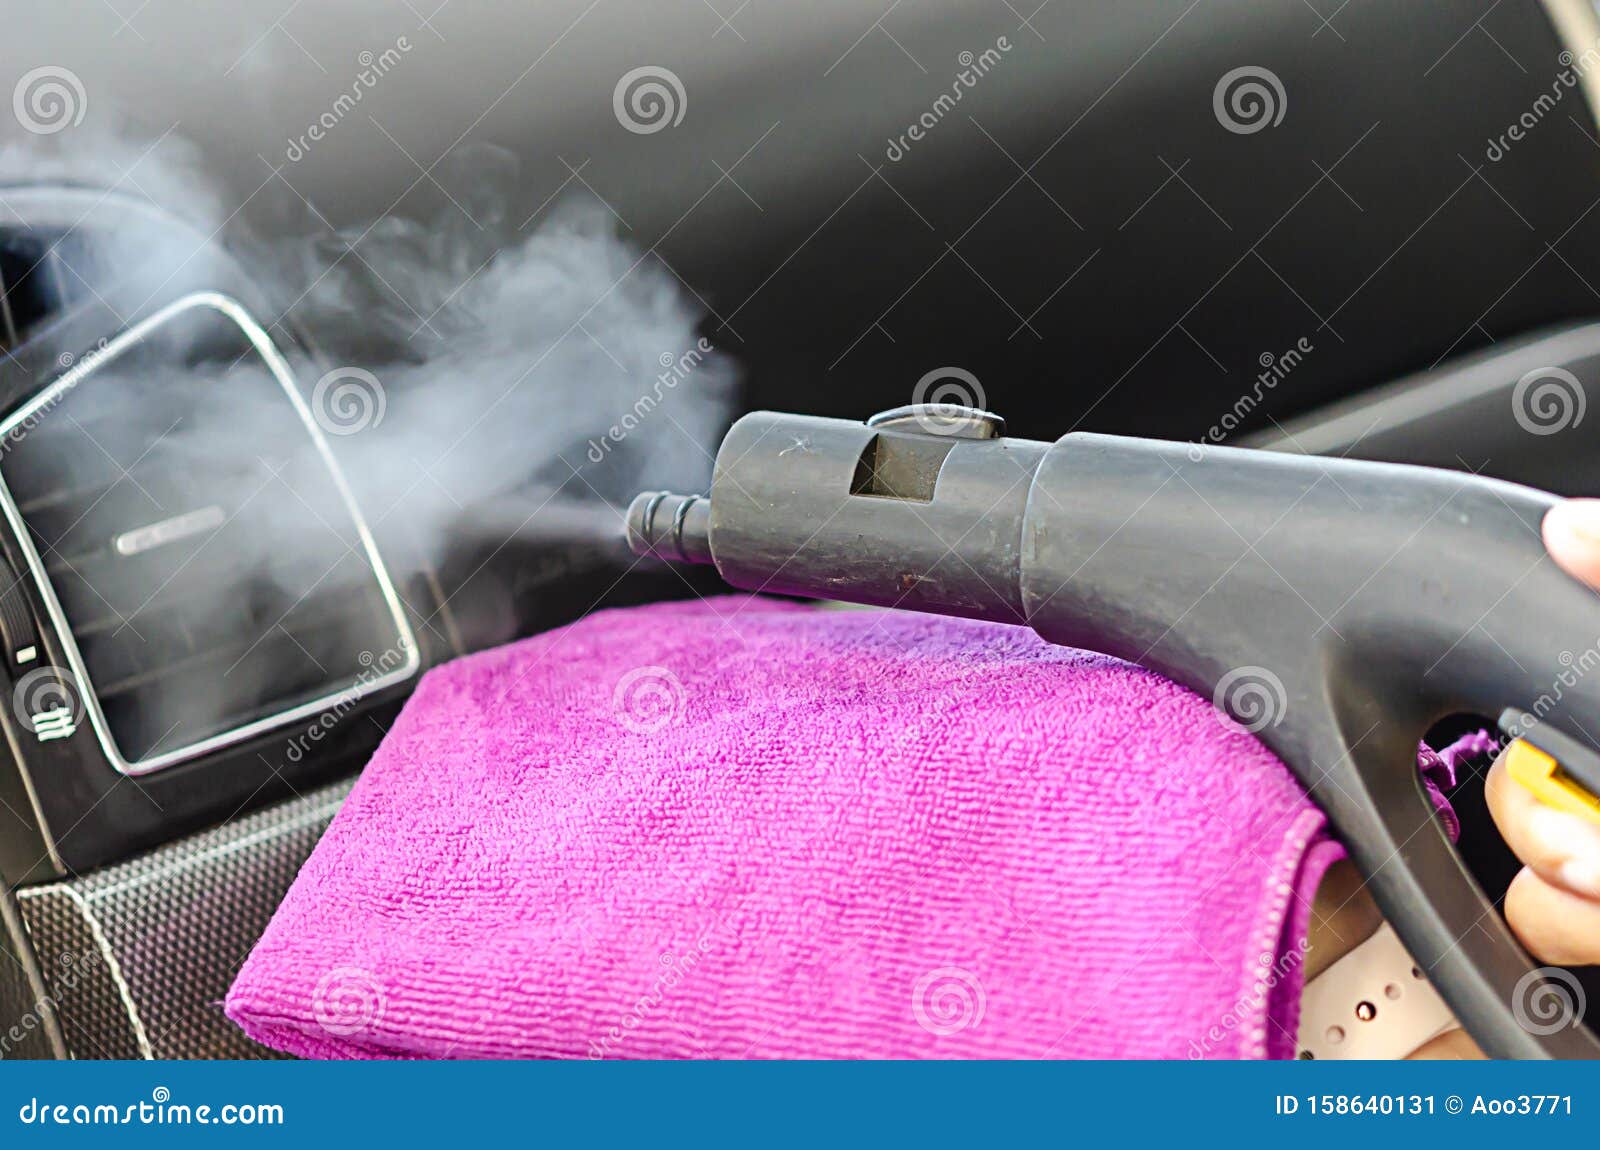 Cleaning of Car Air Conditioner Stock Image - Image of cold, console